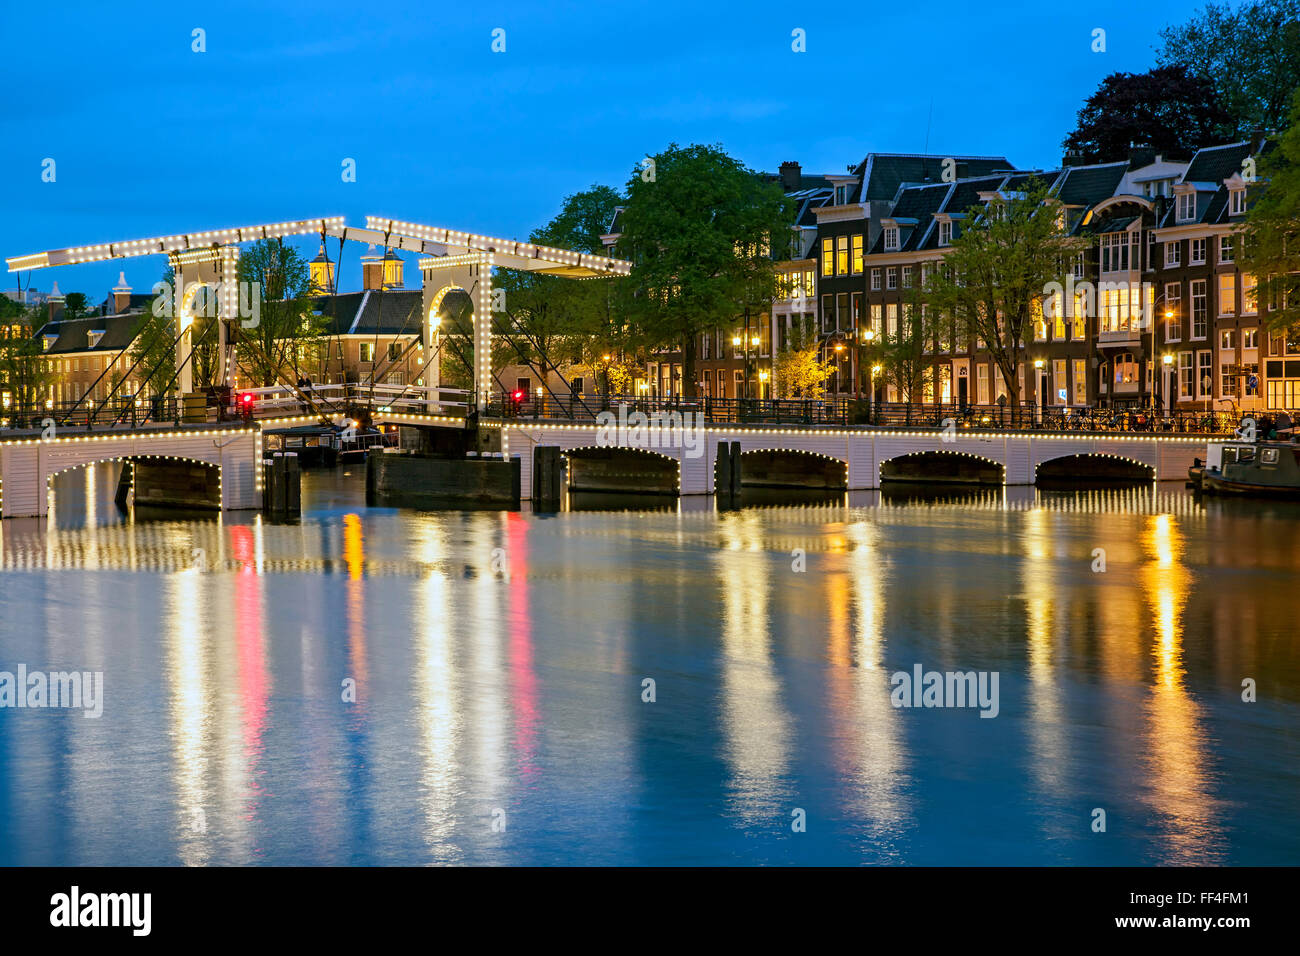 Magere Brug (Skinny Bridge) and Amstel River, Amsterdam, Holland, the Netherlands Stock Photo